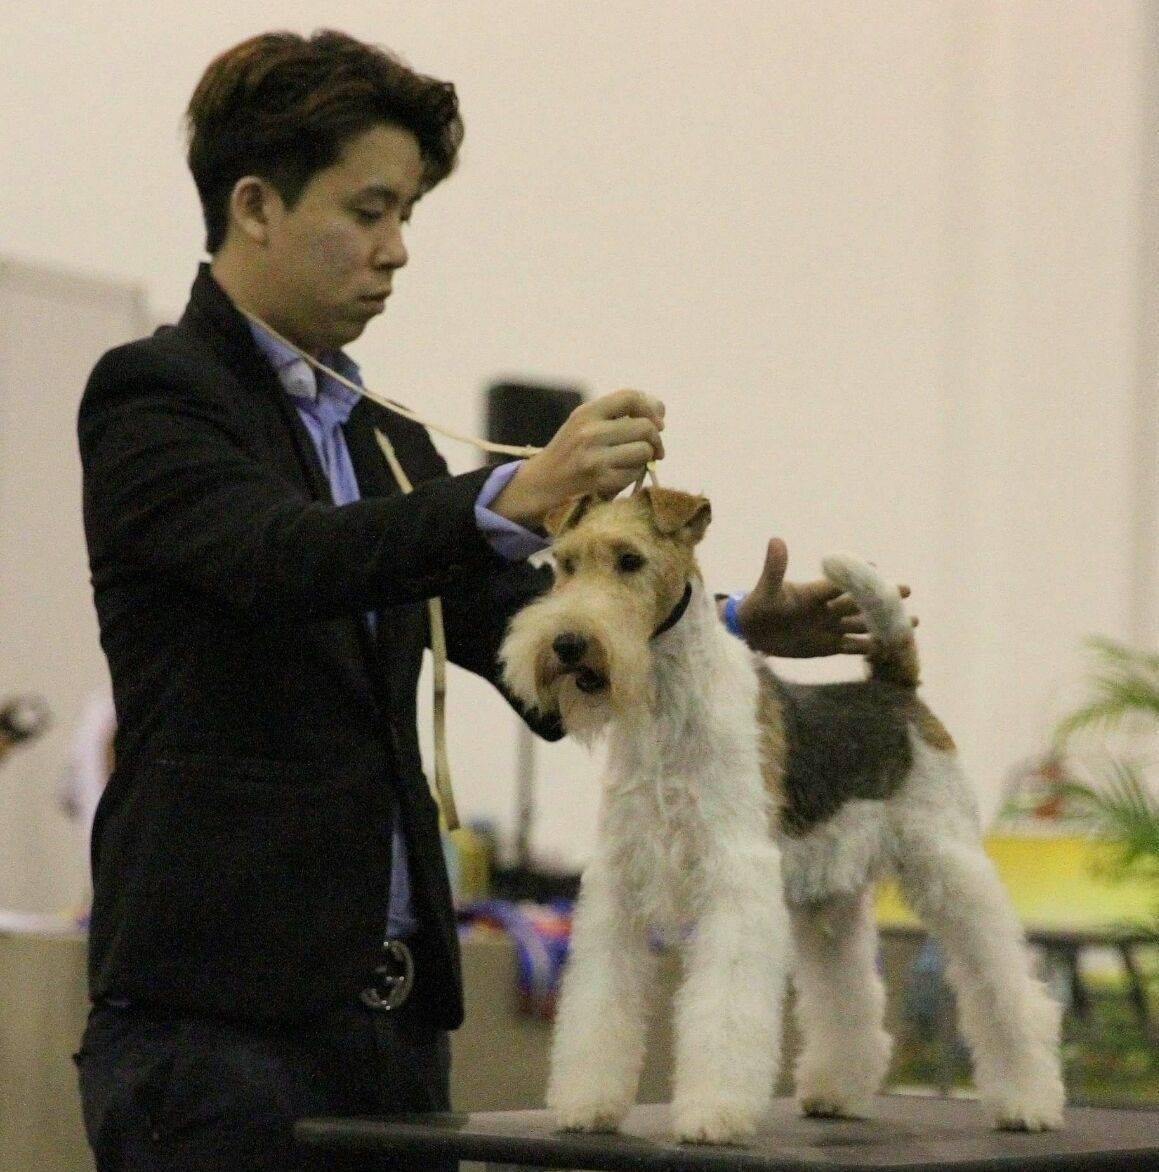 Jason lok showing our wire fox terrier.